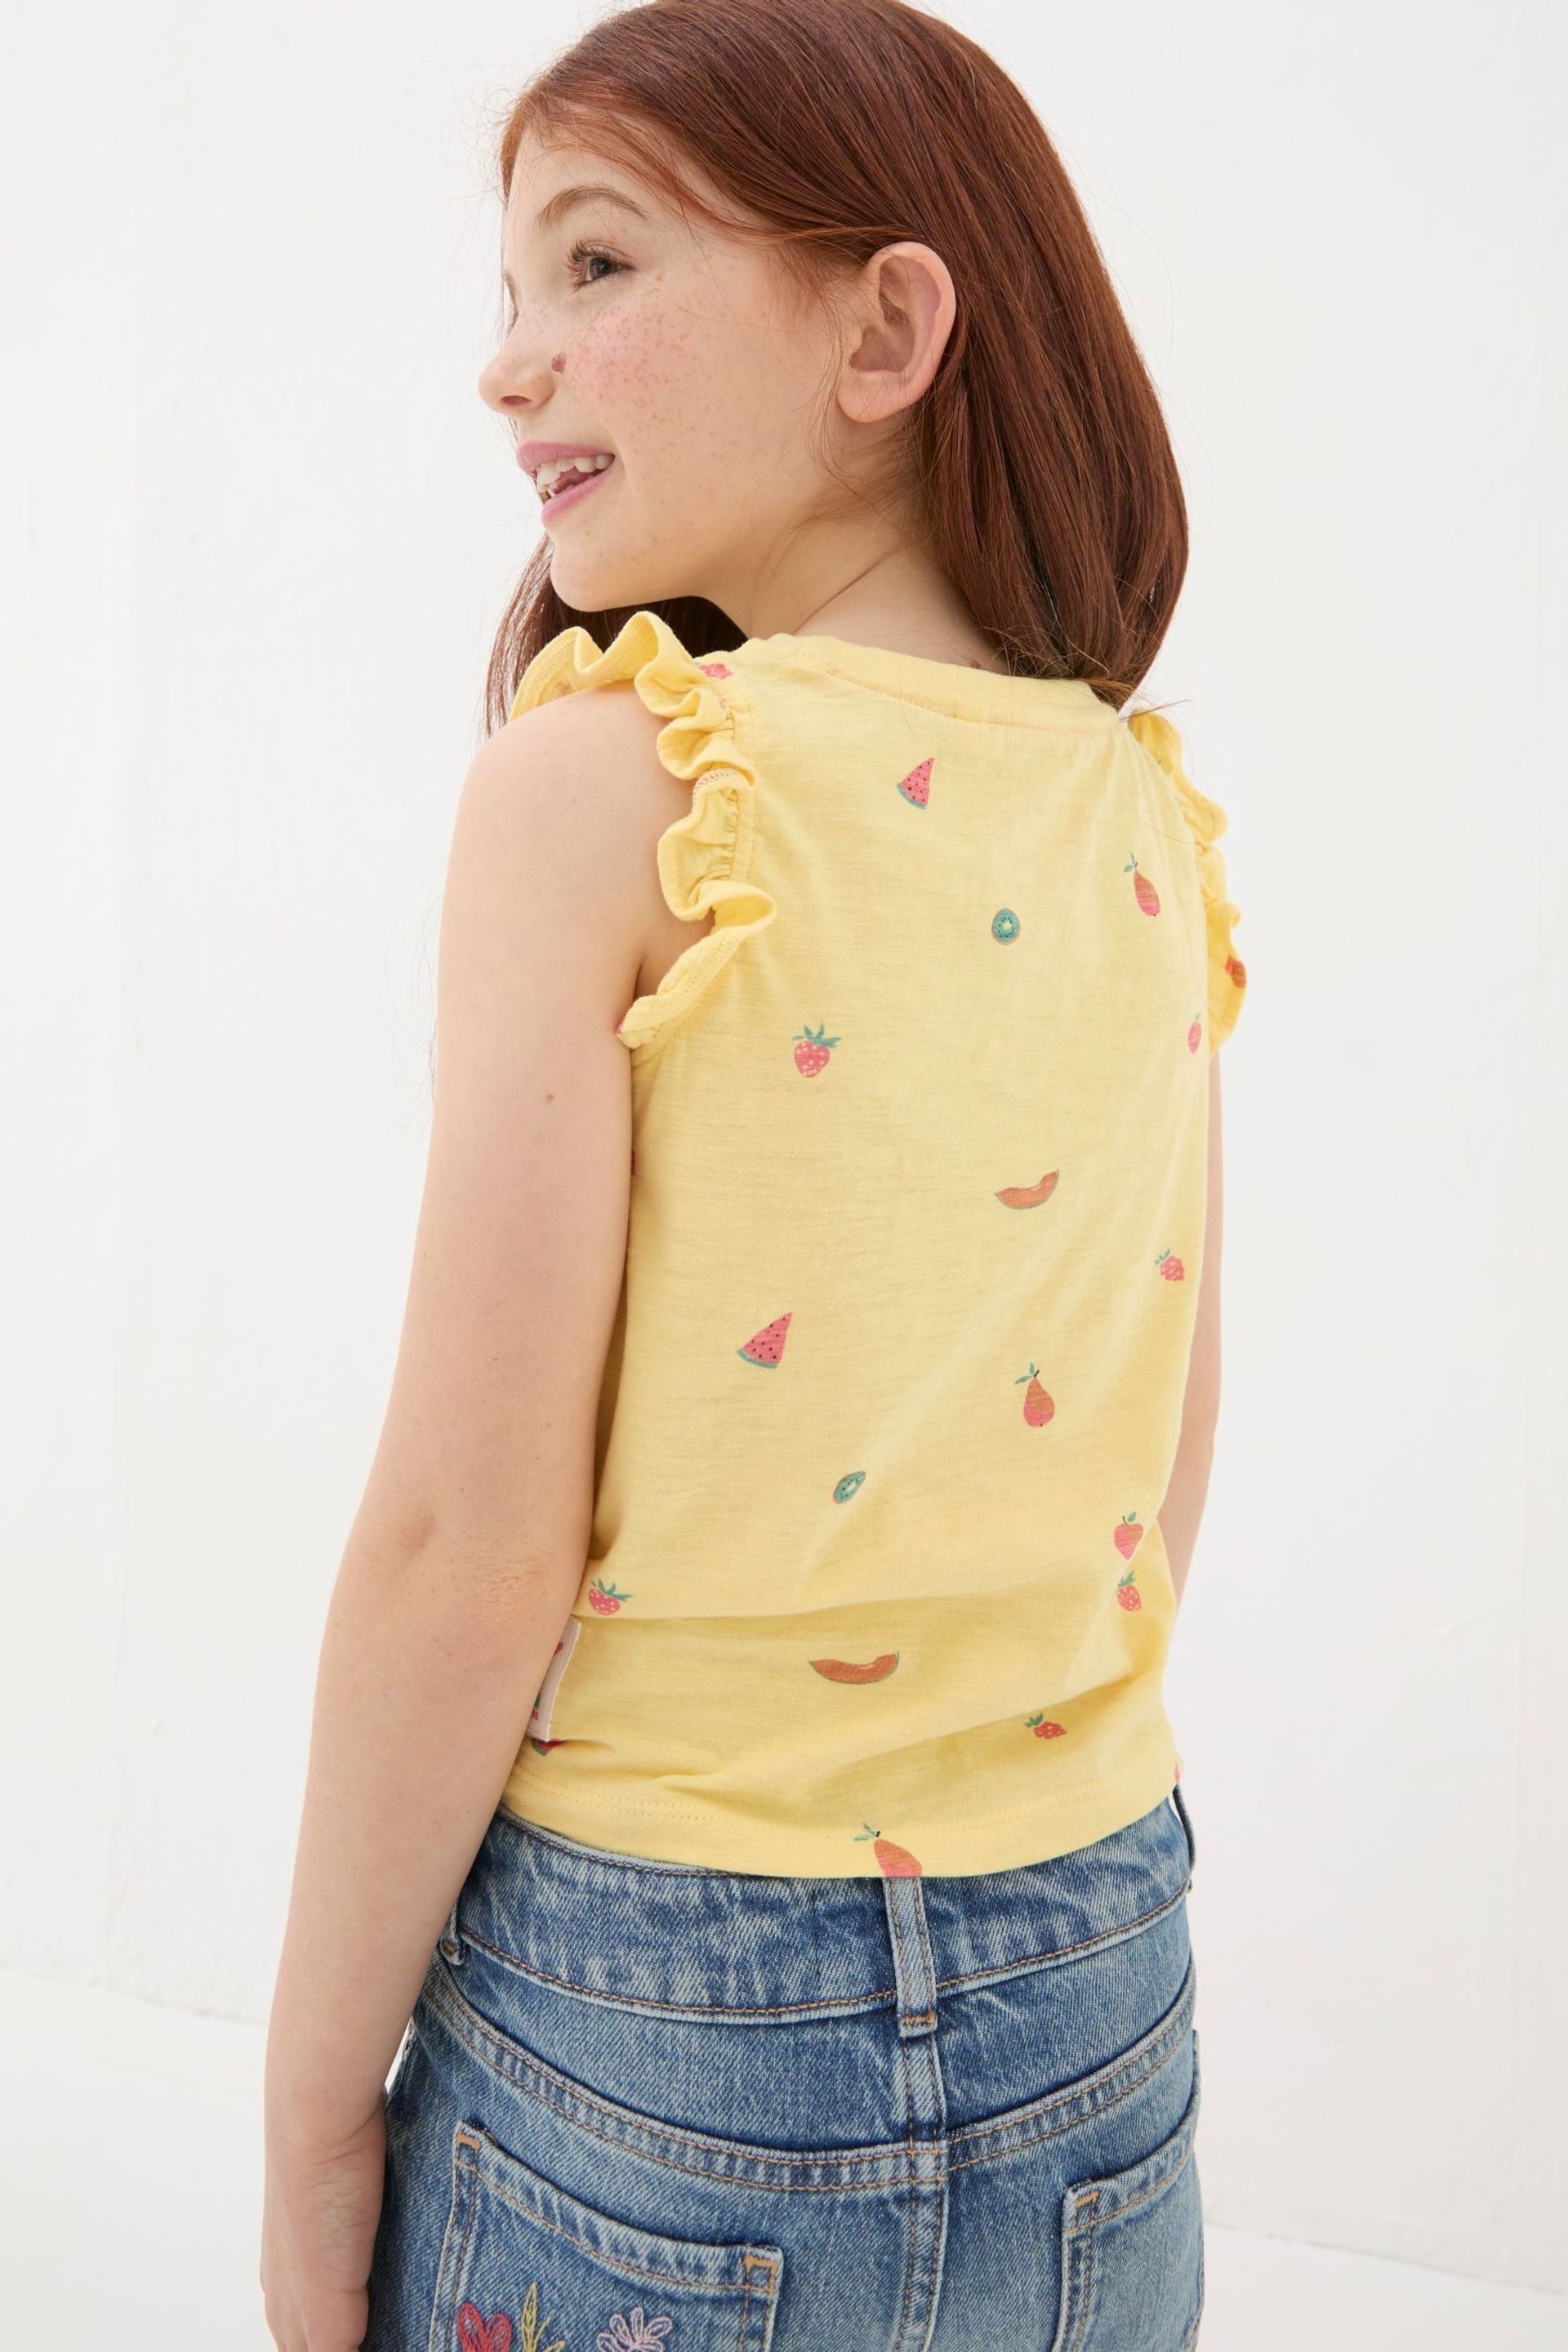 FatFace Yellow Fruit Knot Front T-Shirt - Image 2 of 5